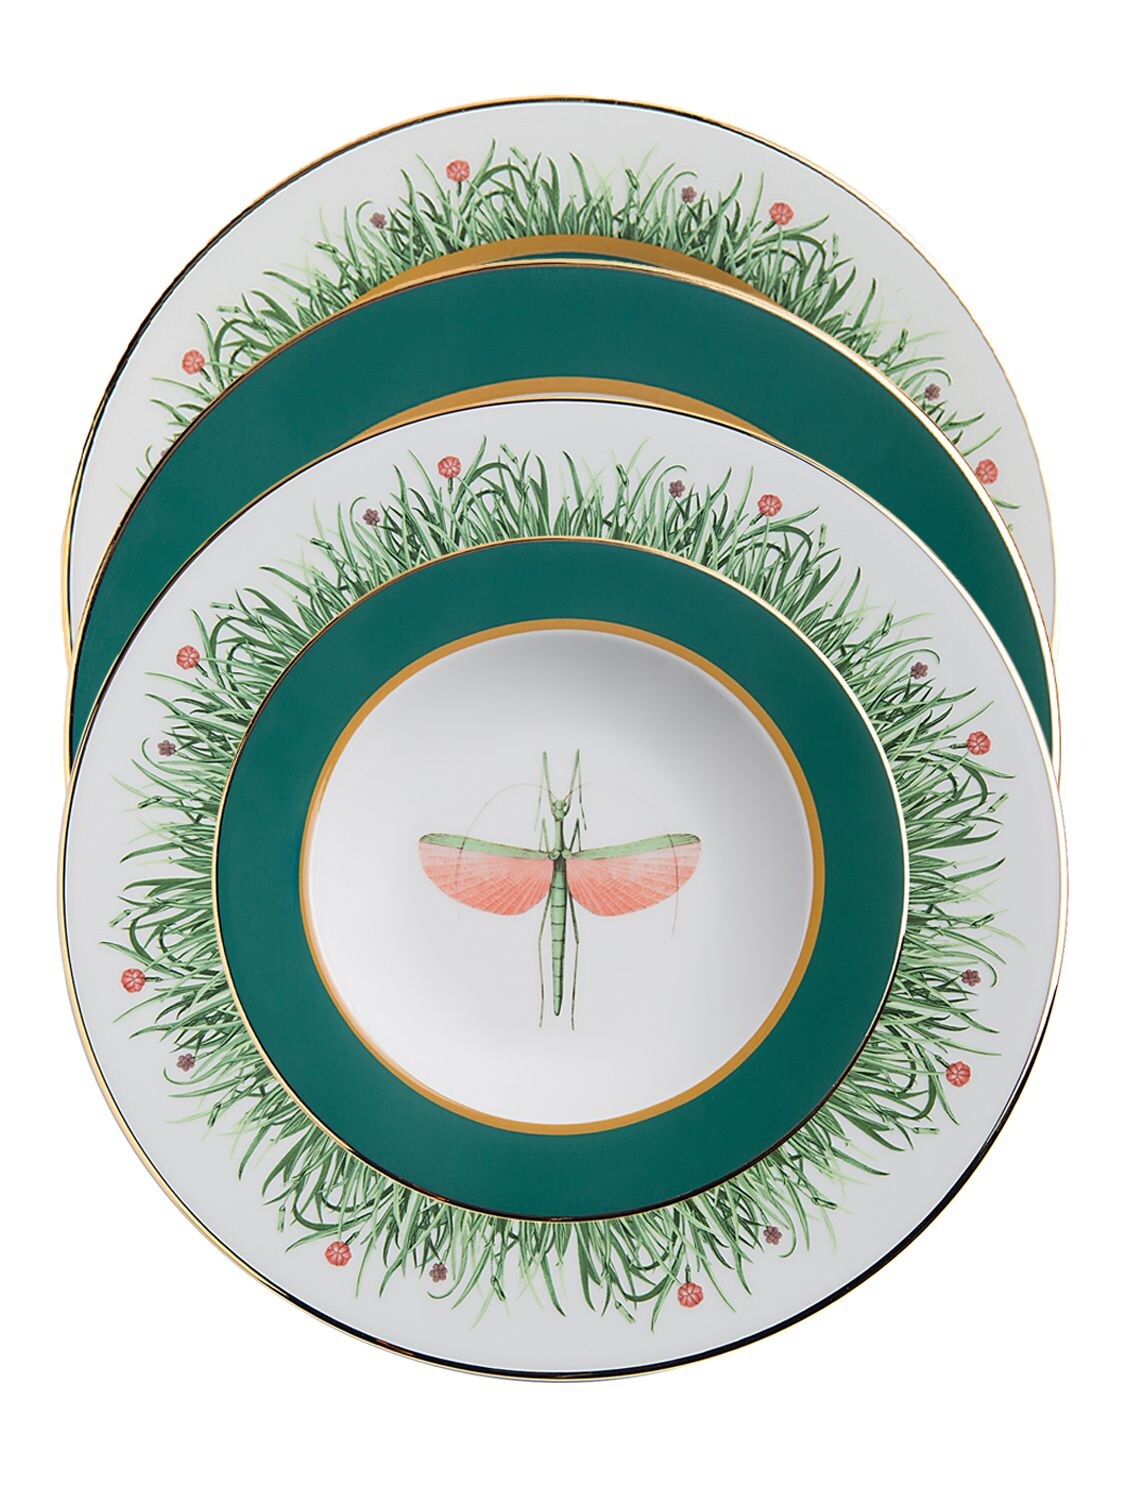 Image of Soup Dish & Dinner Plate Set